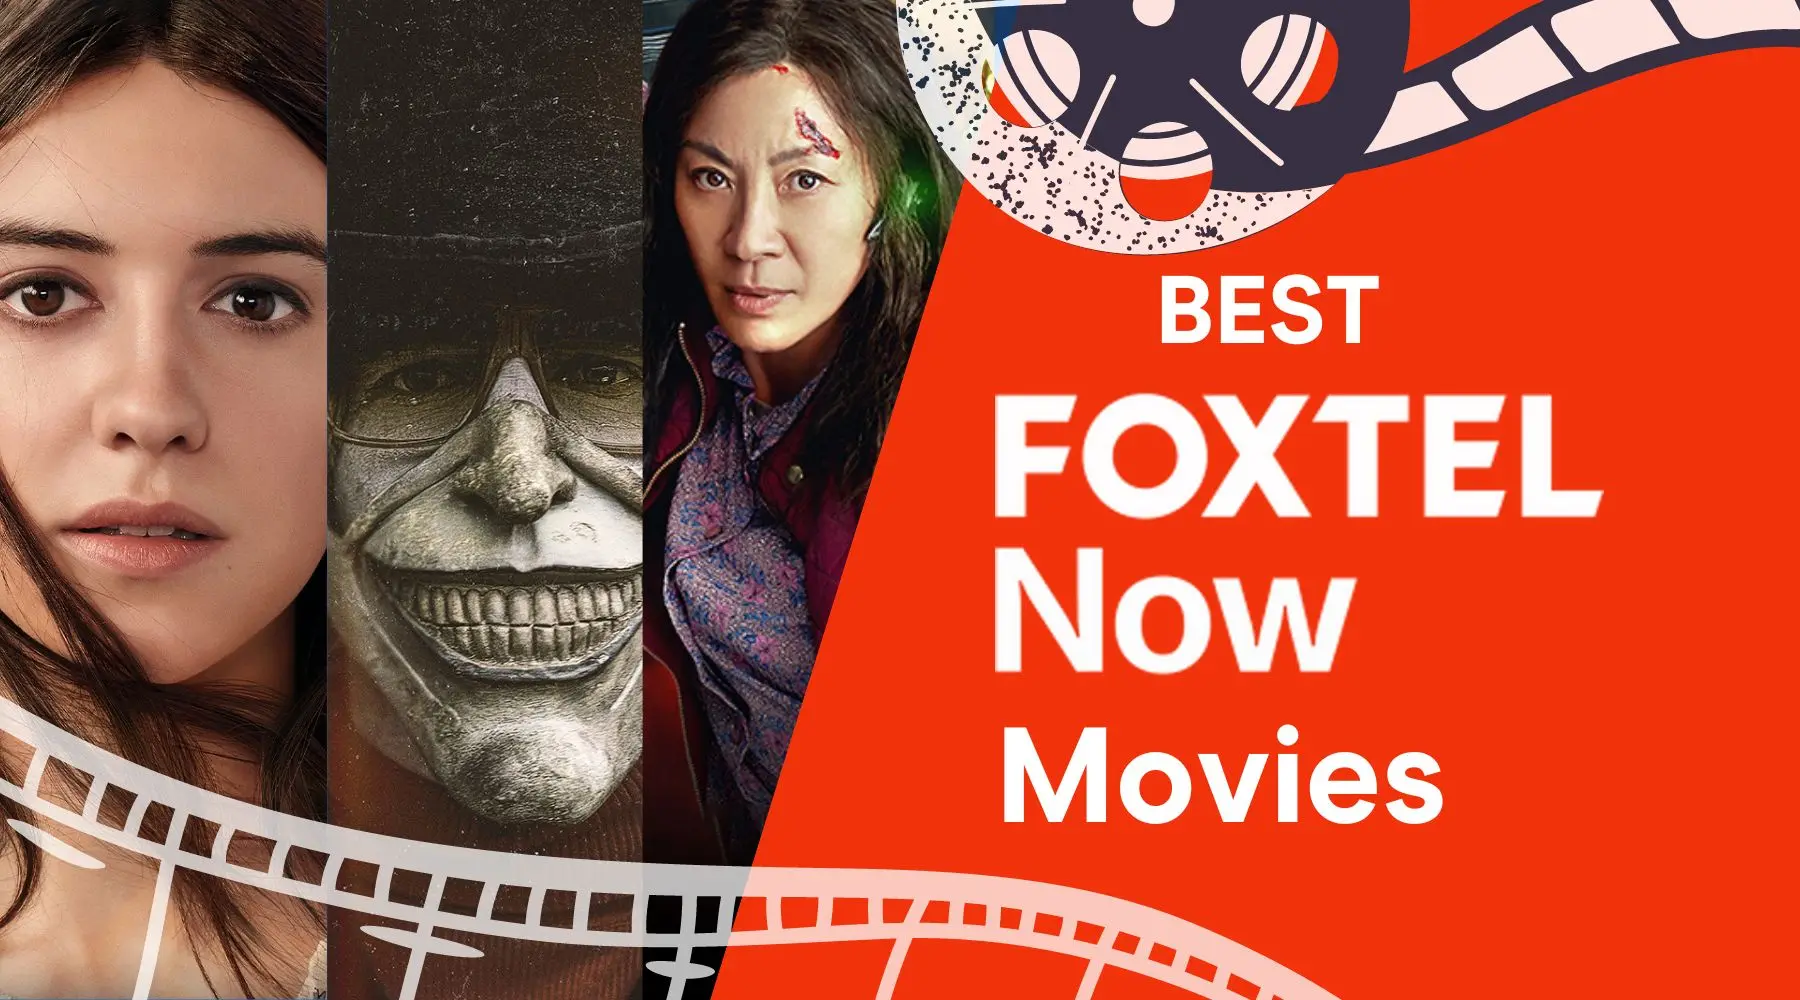 The best Foxtel Now movies streaming in Australia